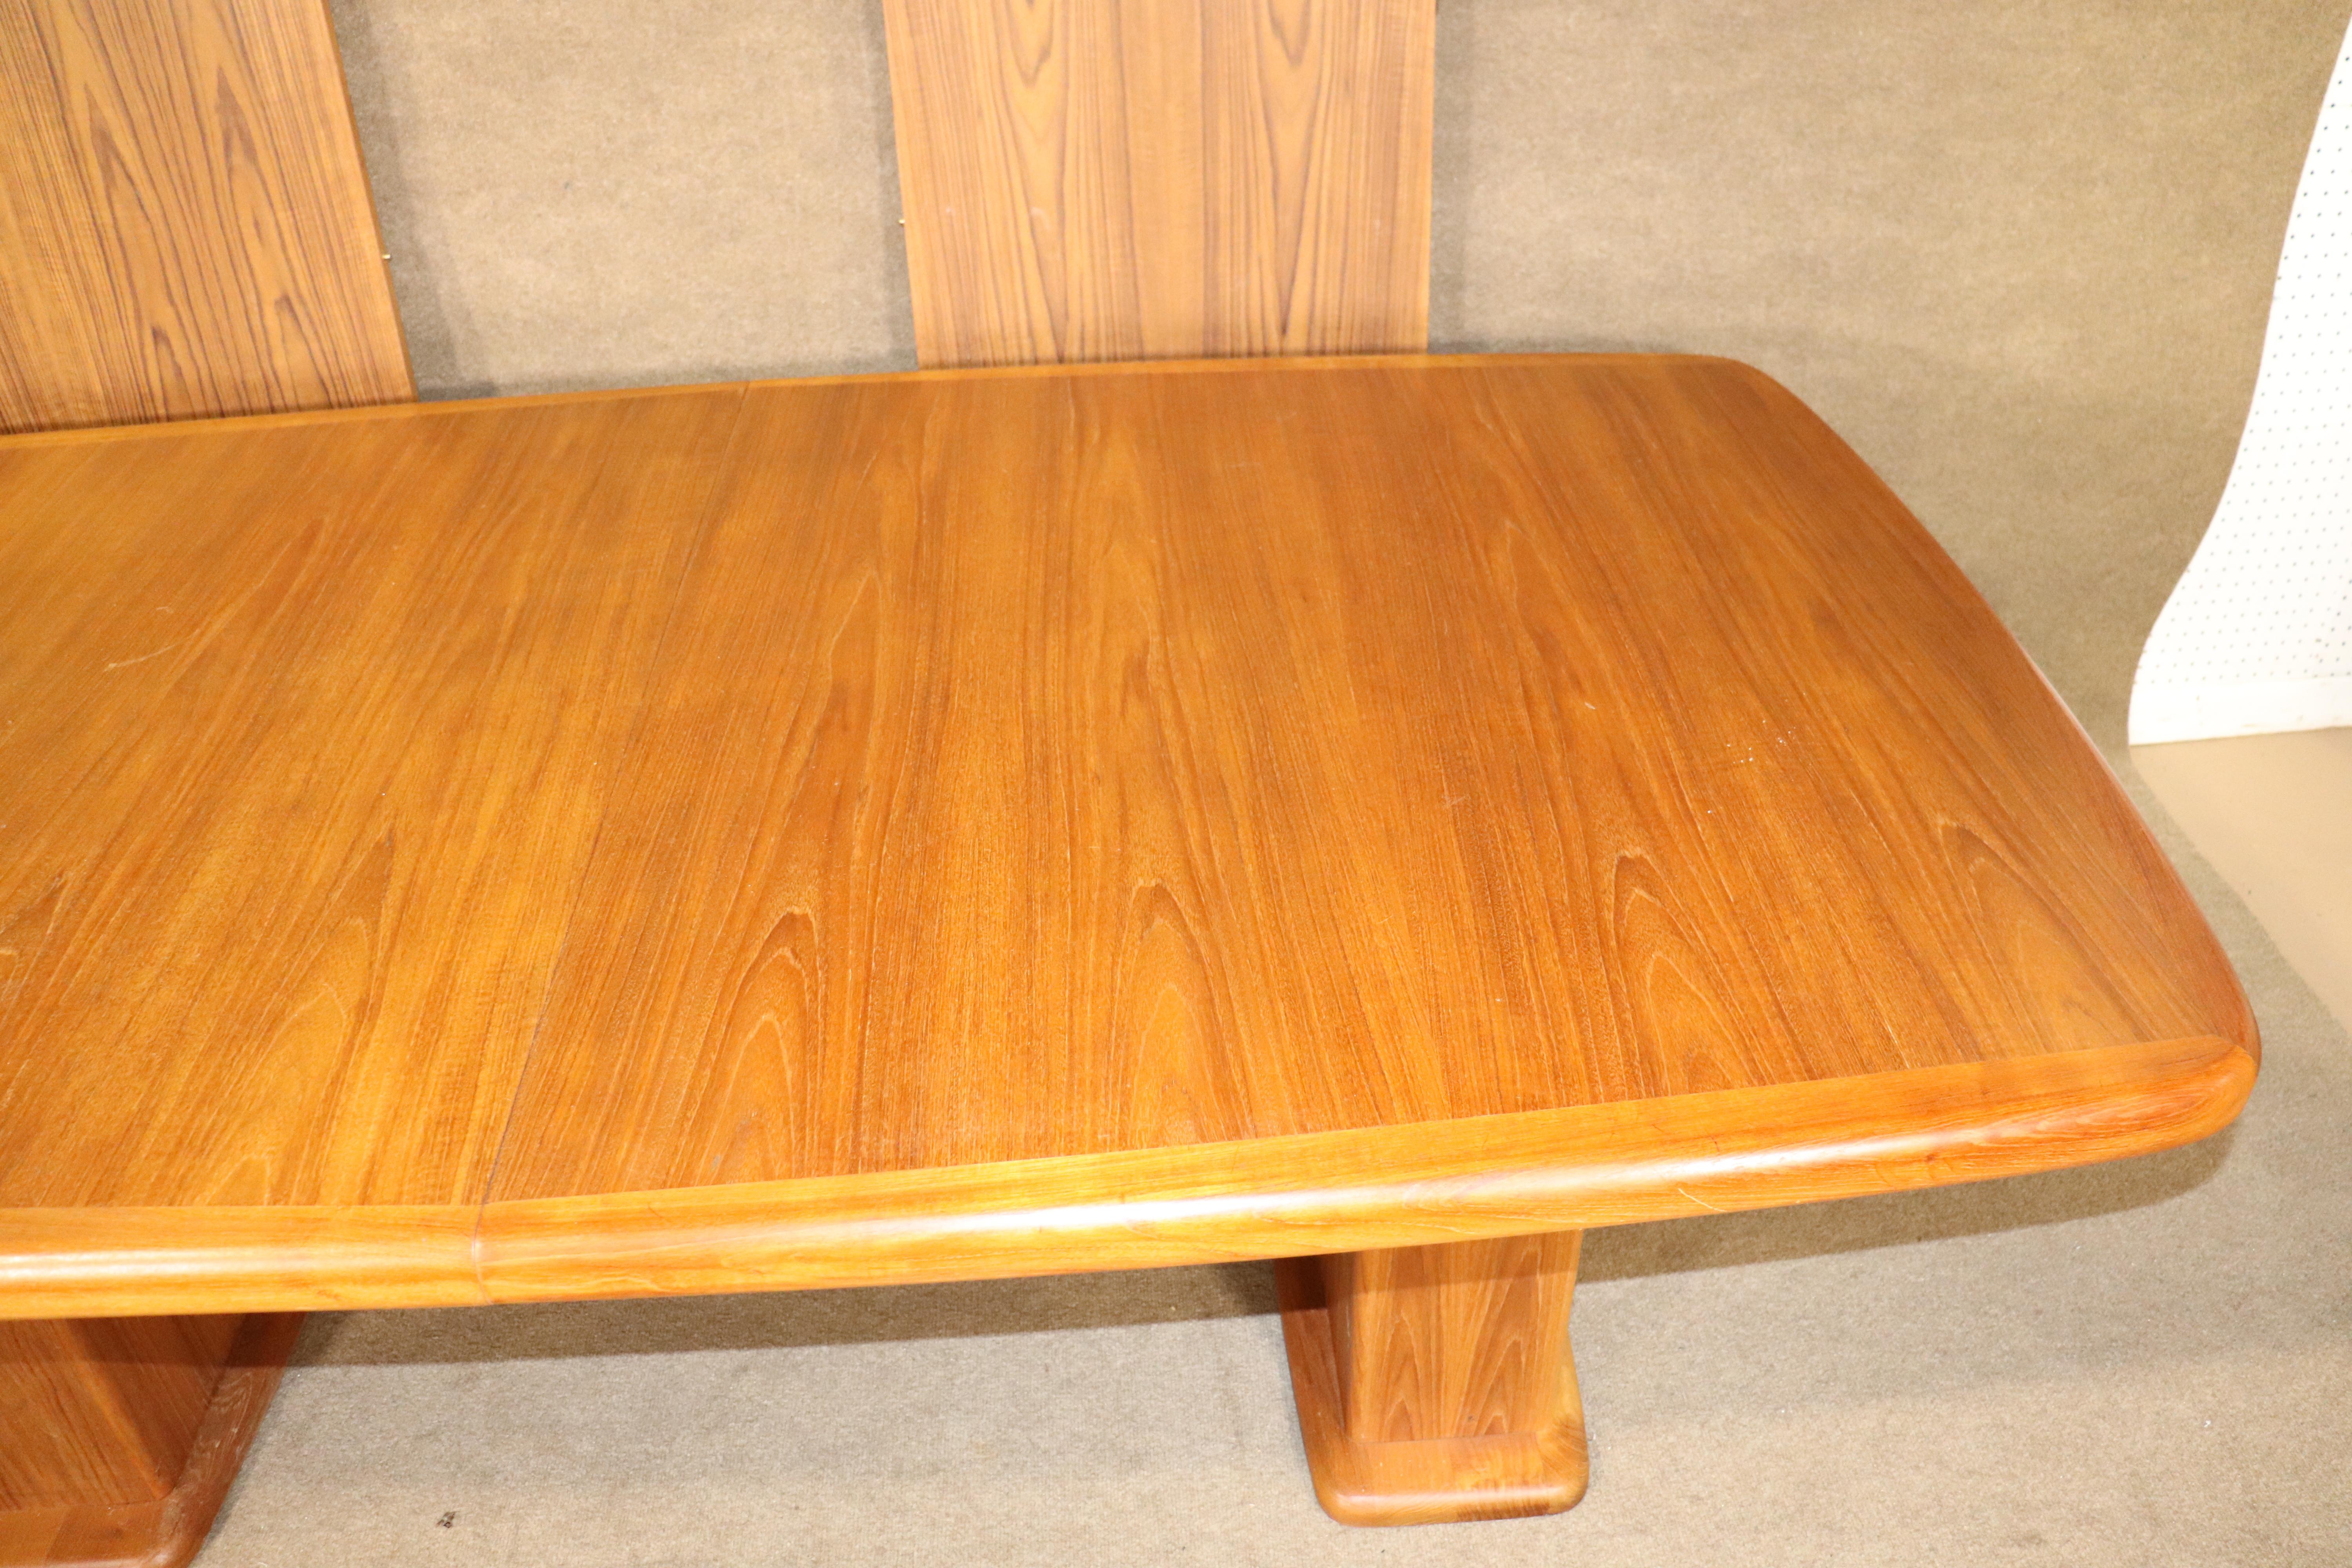 Mid-Century Modern dining table in teak wood grain. Danish made with two 21.75